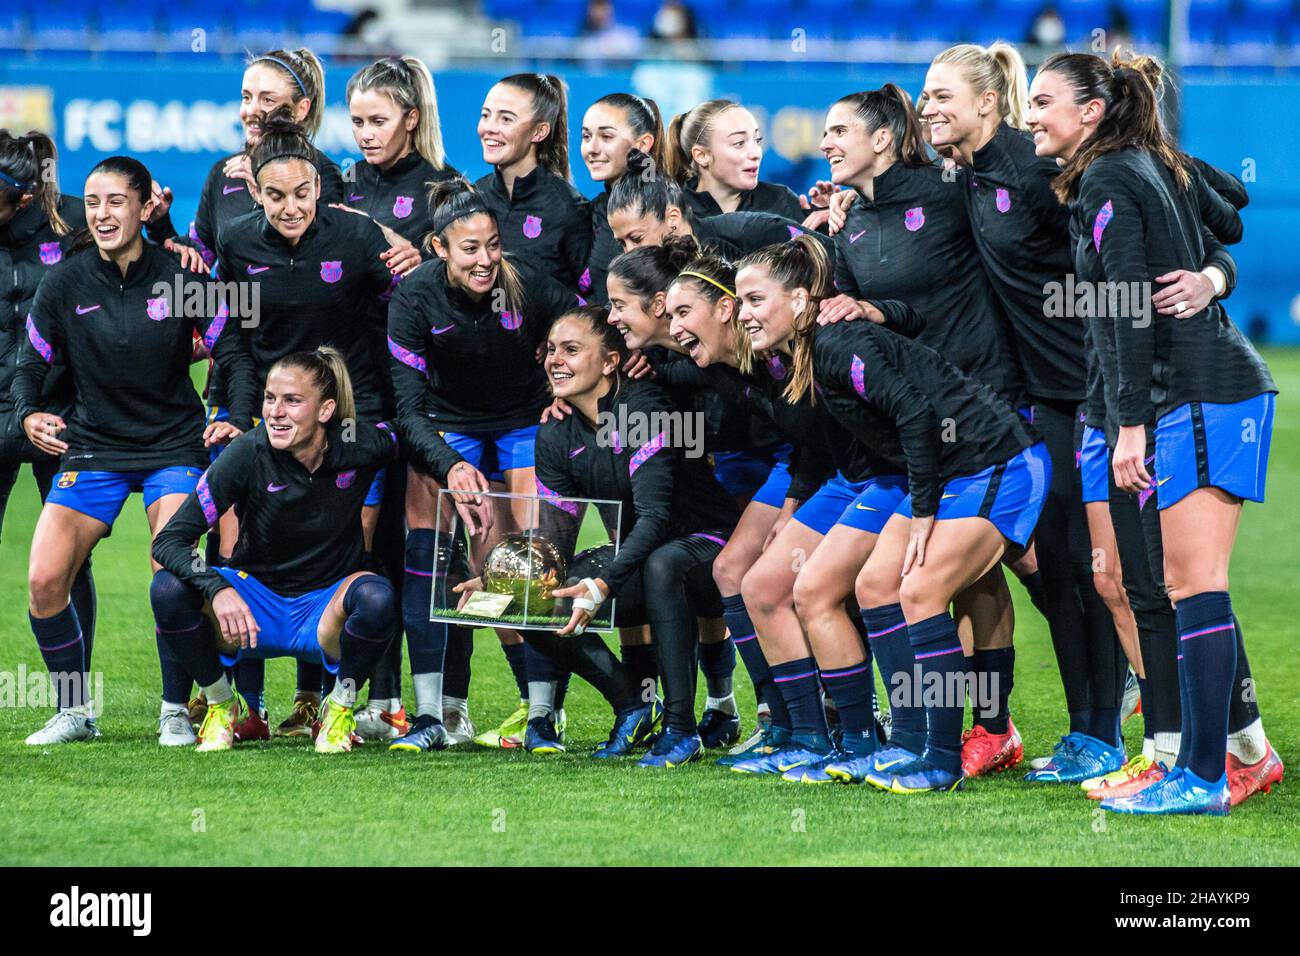 Barcelona, Spain. 15th Dec, 2021. FC Barcelona players pose for a group  photo with a trophy during the UEFA Women's Champions League match between  FC Barcelona Femeni and HB Koge Kvindeelite at